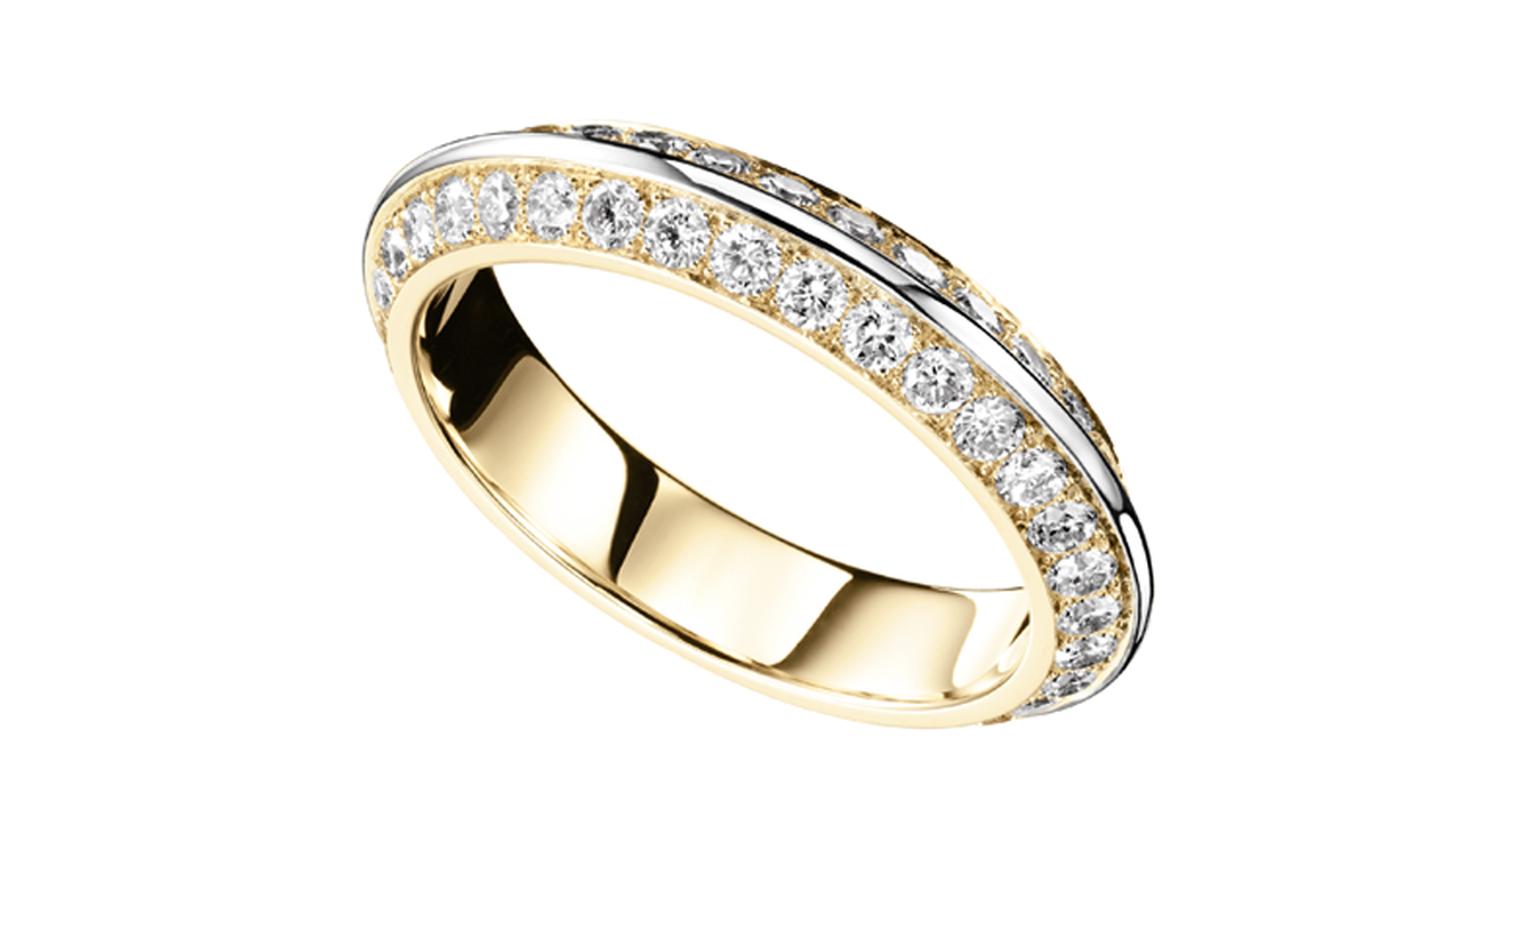 BOUCHERON, Eternal Grace wedding ring, yellow and white gold,  paved with diamonds. Price from £7,800